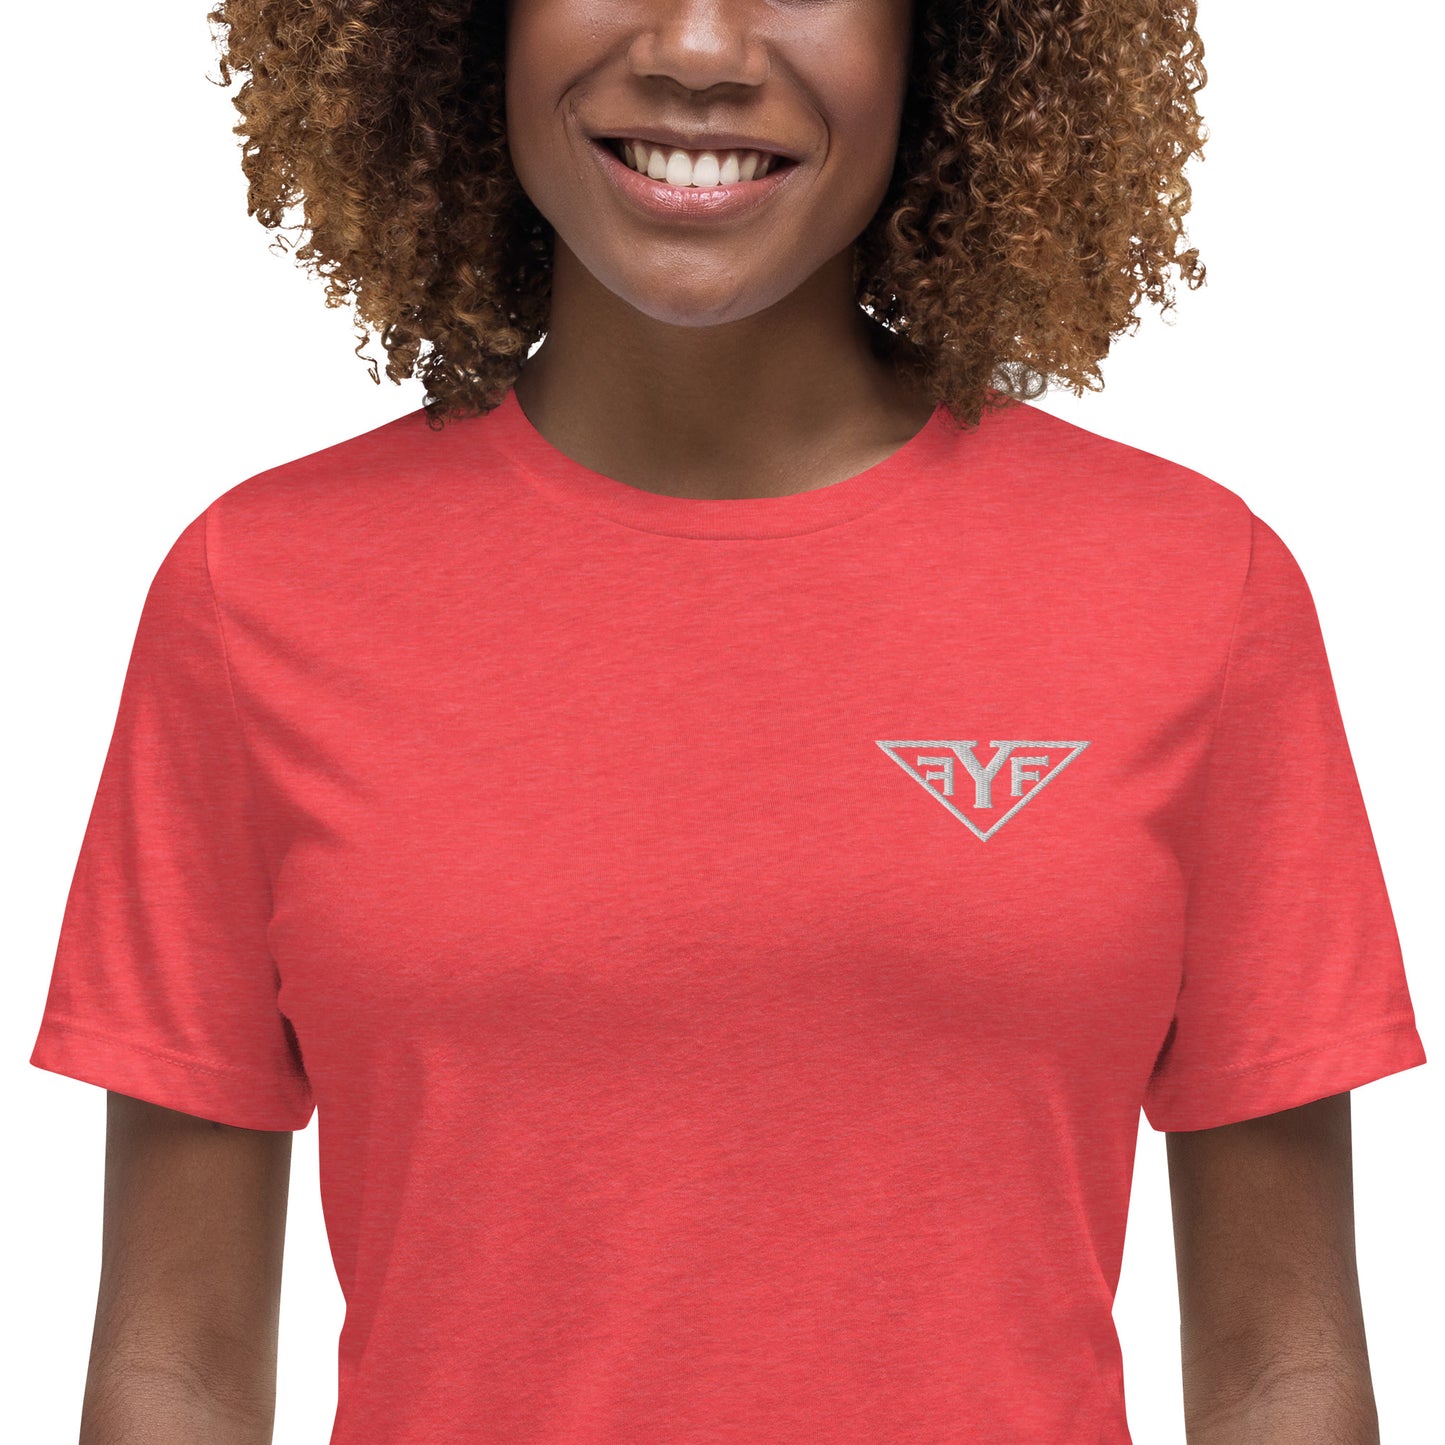 Women's Relaxed T-Shirt (NO WORDING ON BACK)